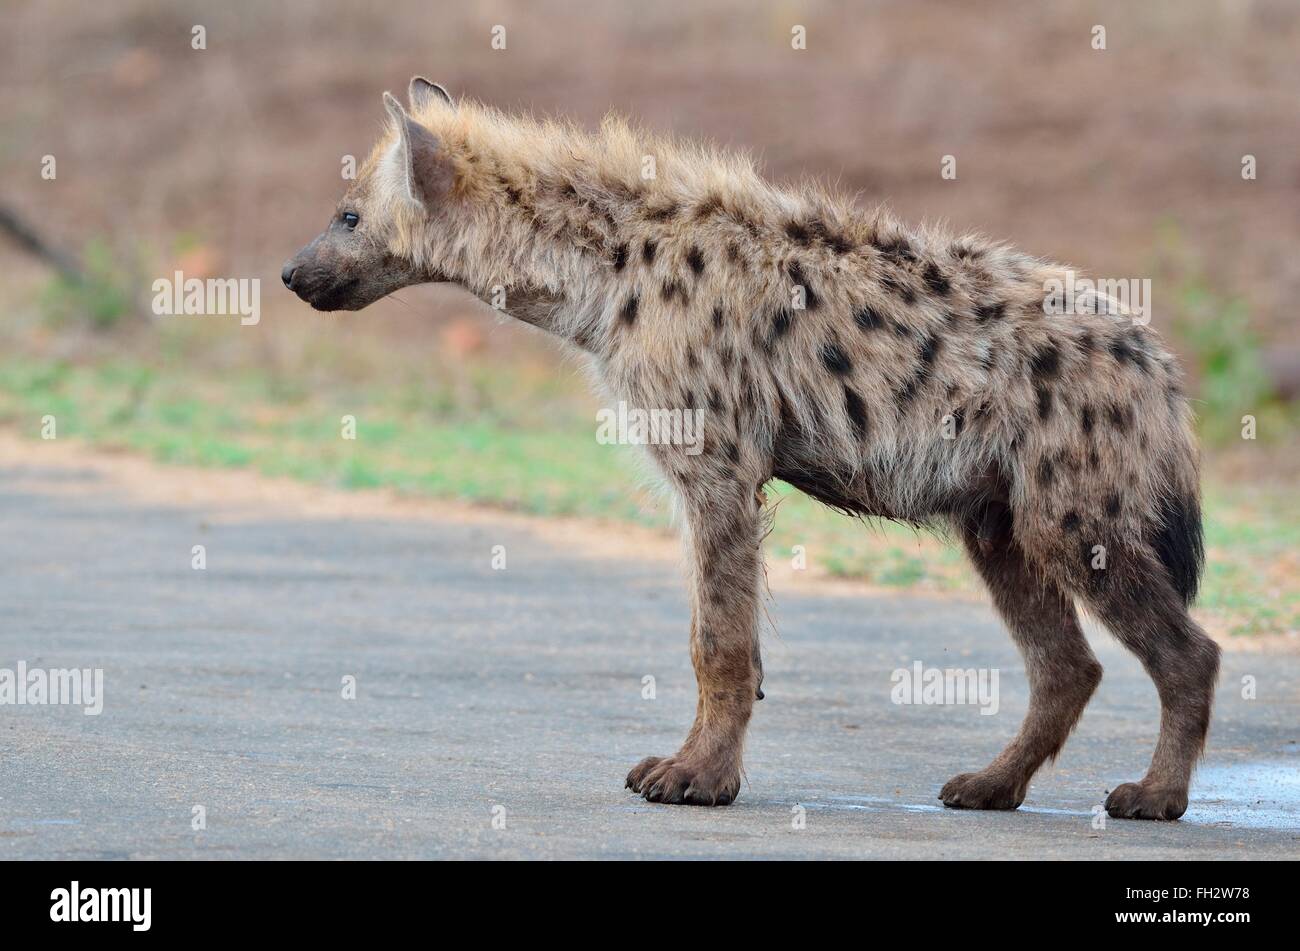 Spotted hyena (Crocuta crocuta), young male standing on road, Kruger National Park, South Africa, Africa Stock Photo